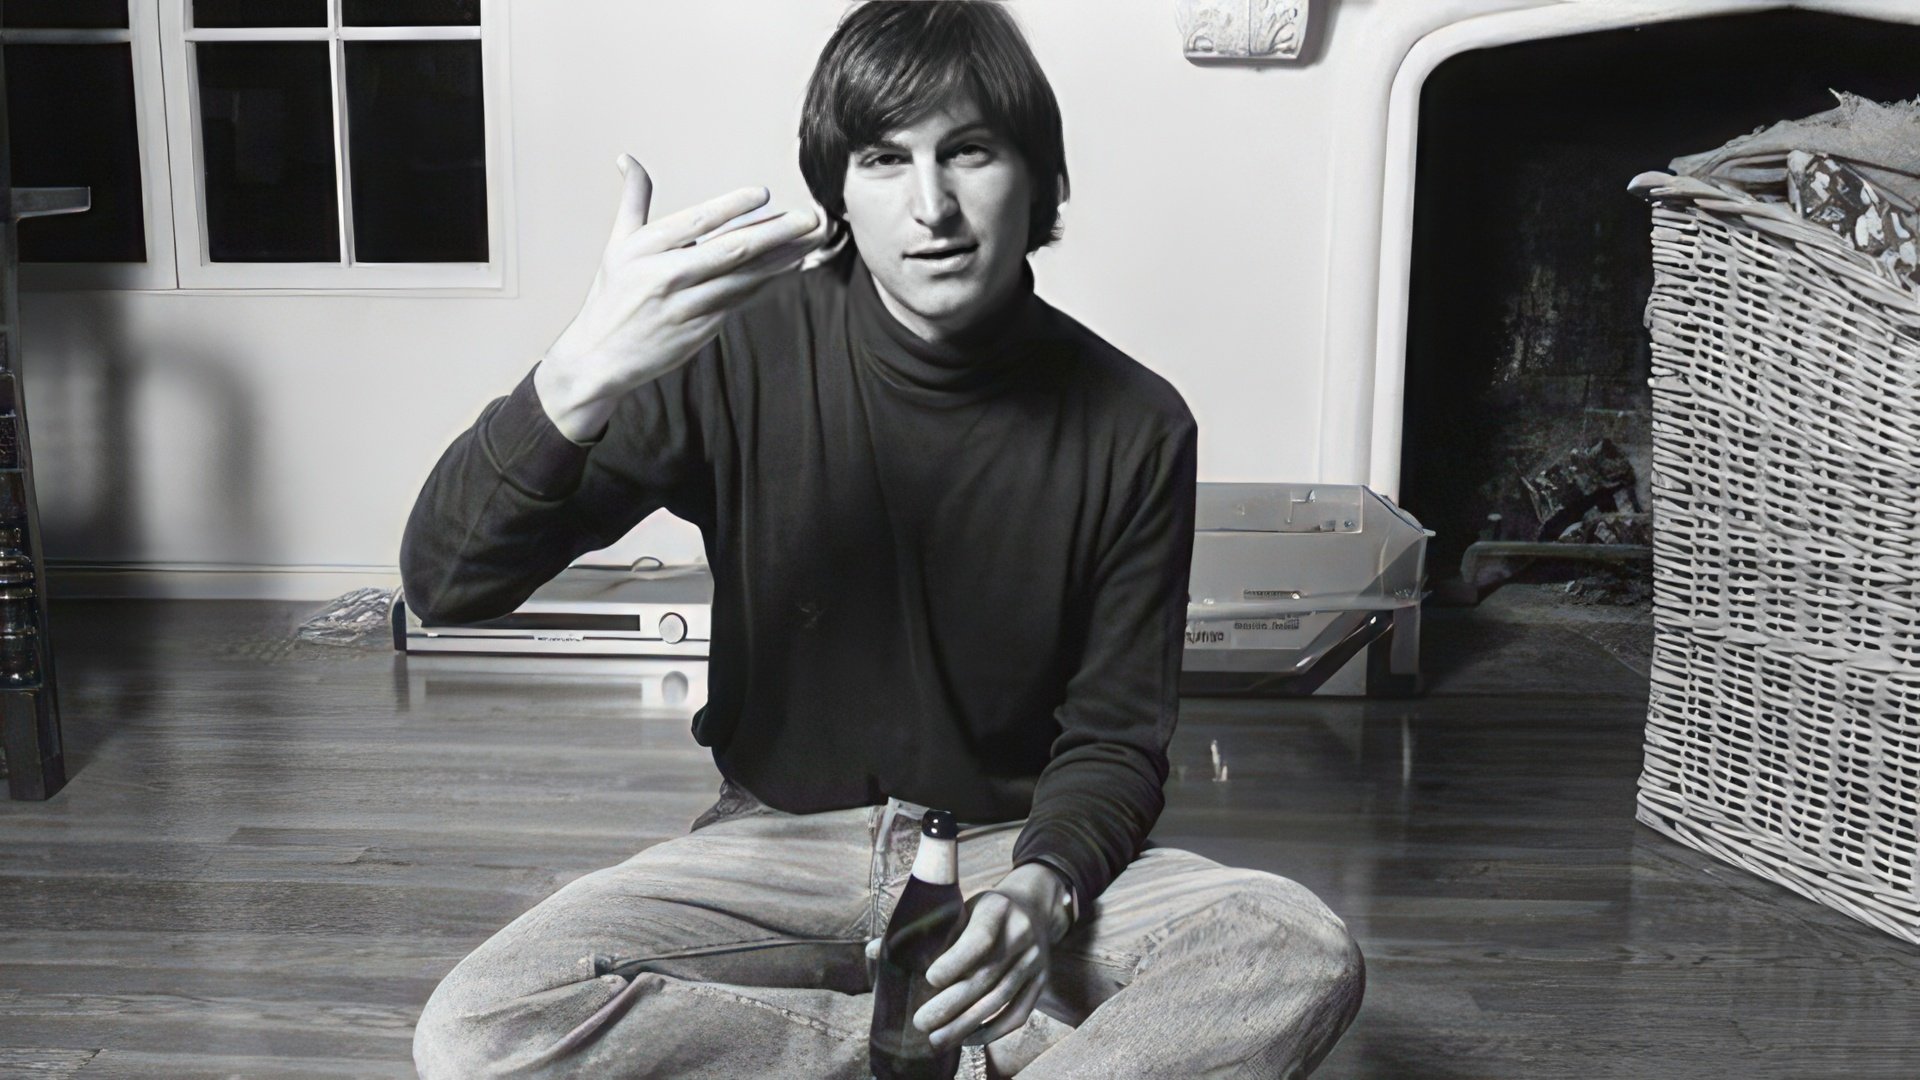 Steve Jobs in his youth